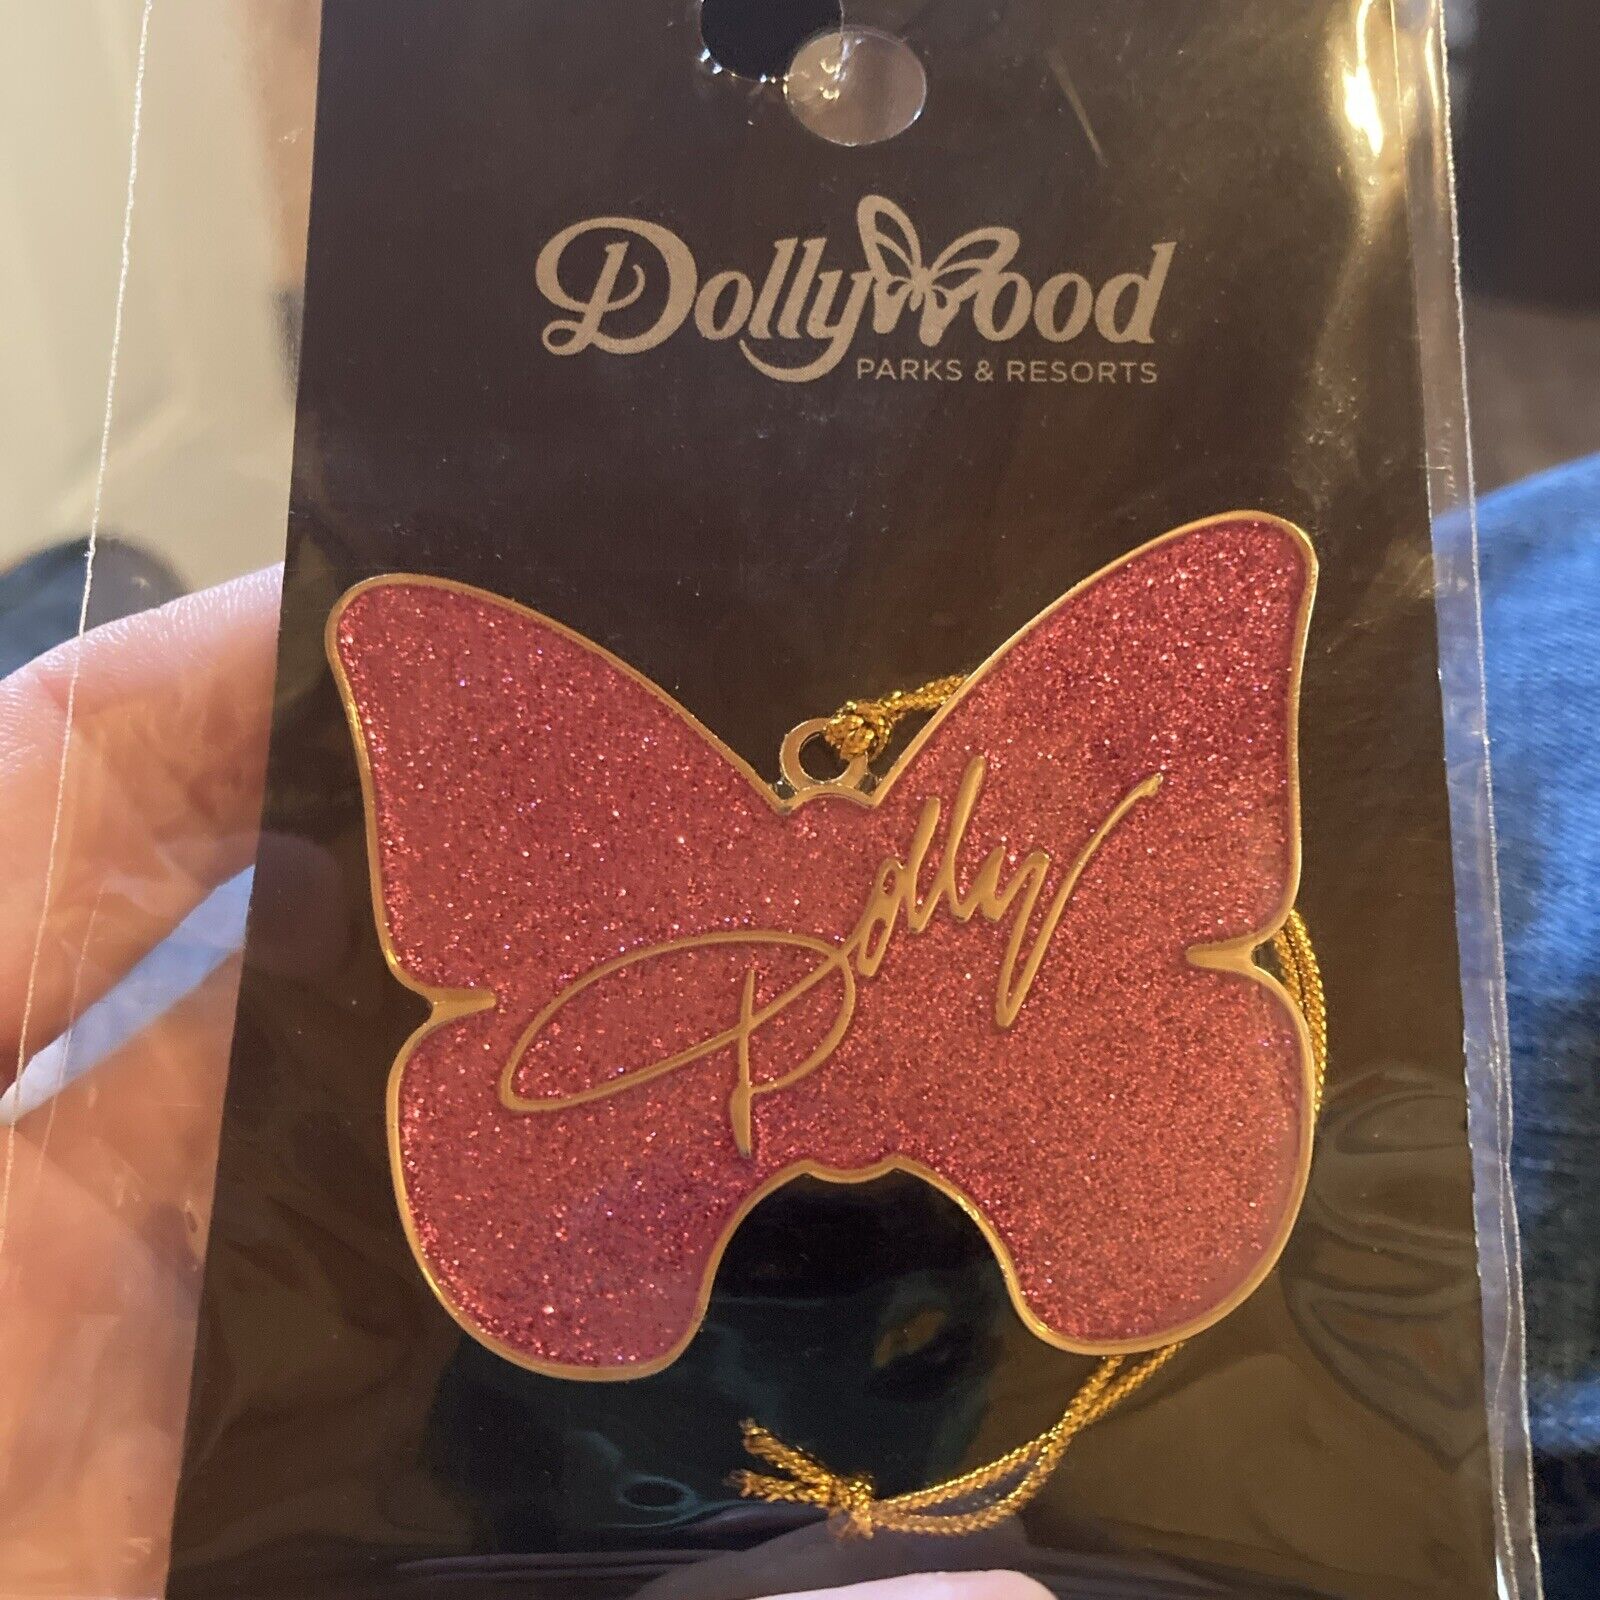 Dollywood Dolly Parton Experience Pink Glitter Ornament 